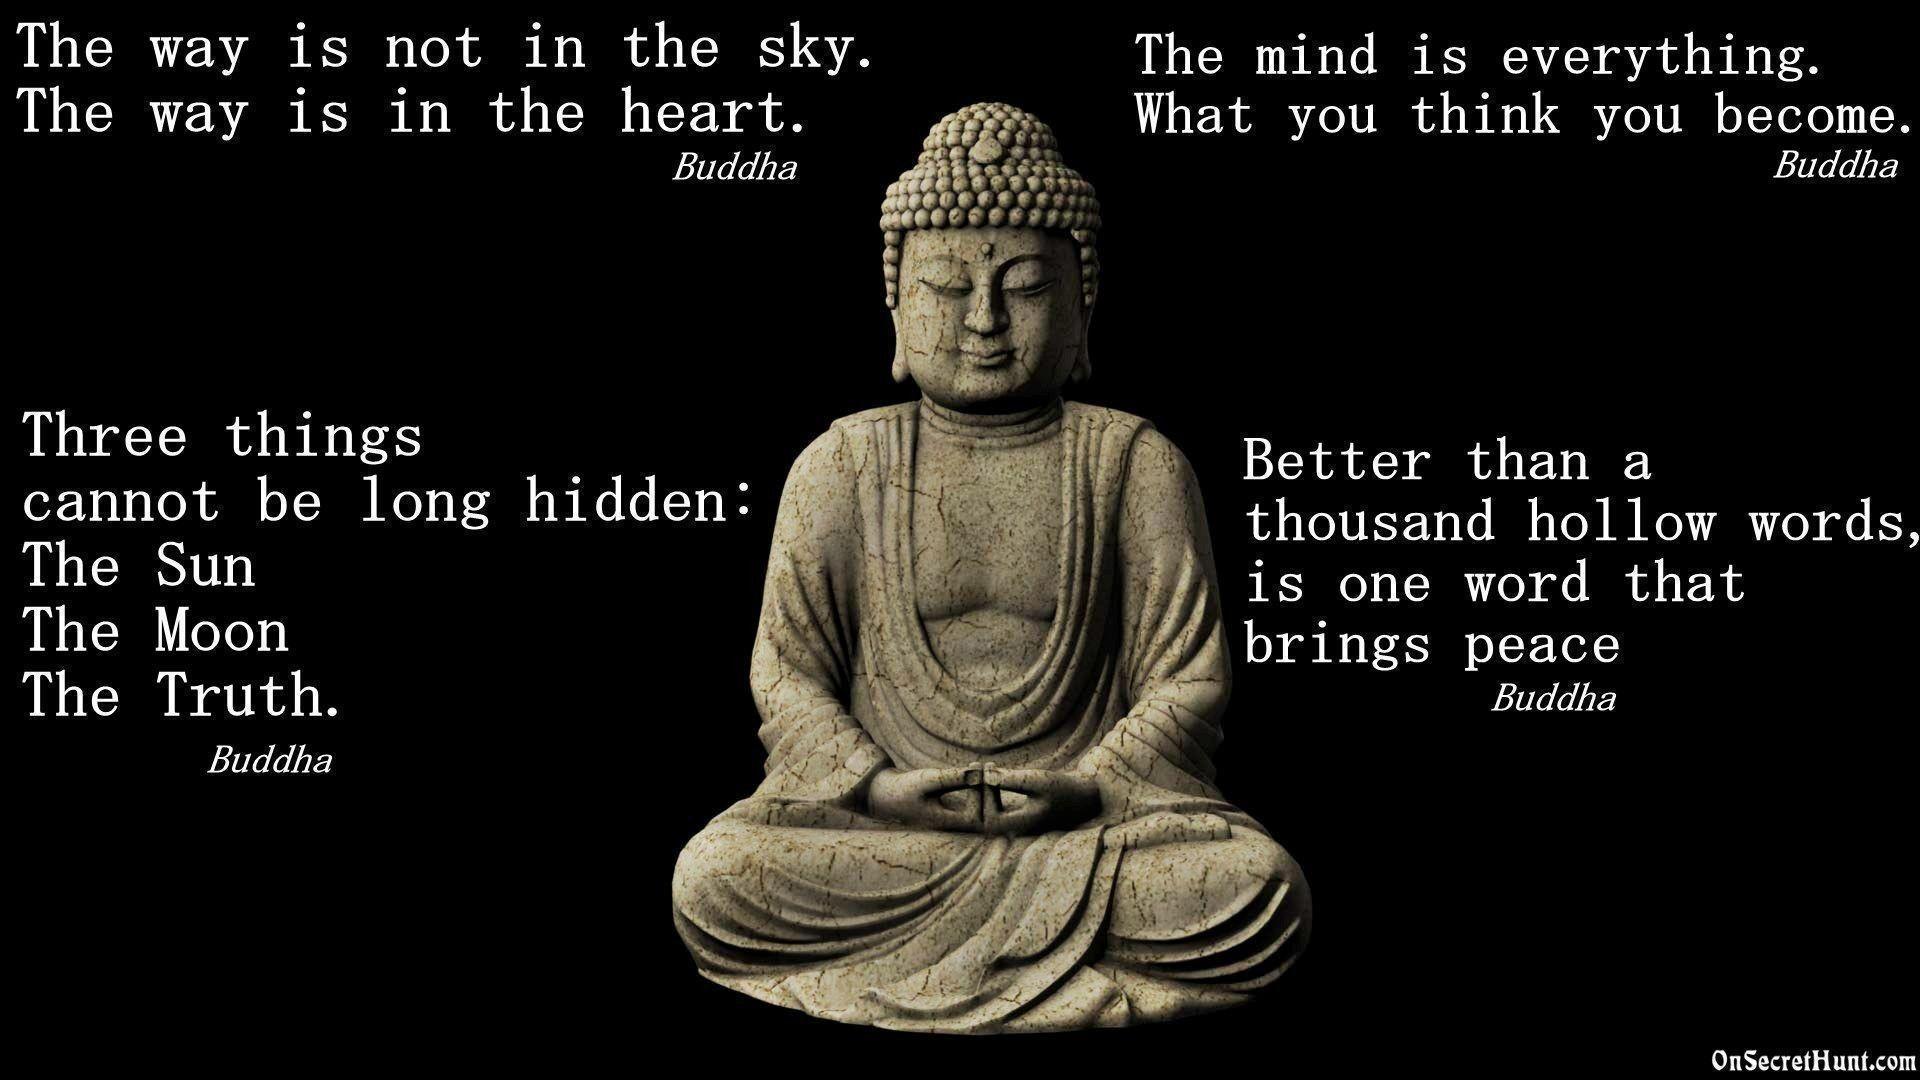 Wallpaper For > Buddha Quotes Wallpaper In Hindi